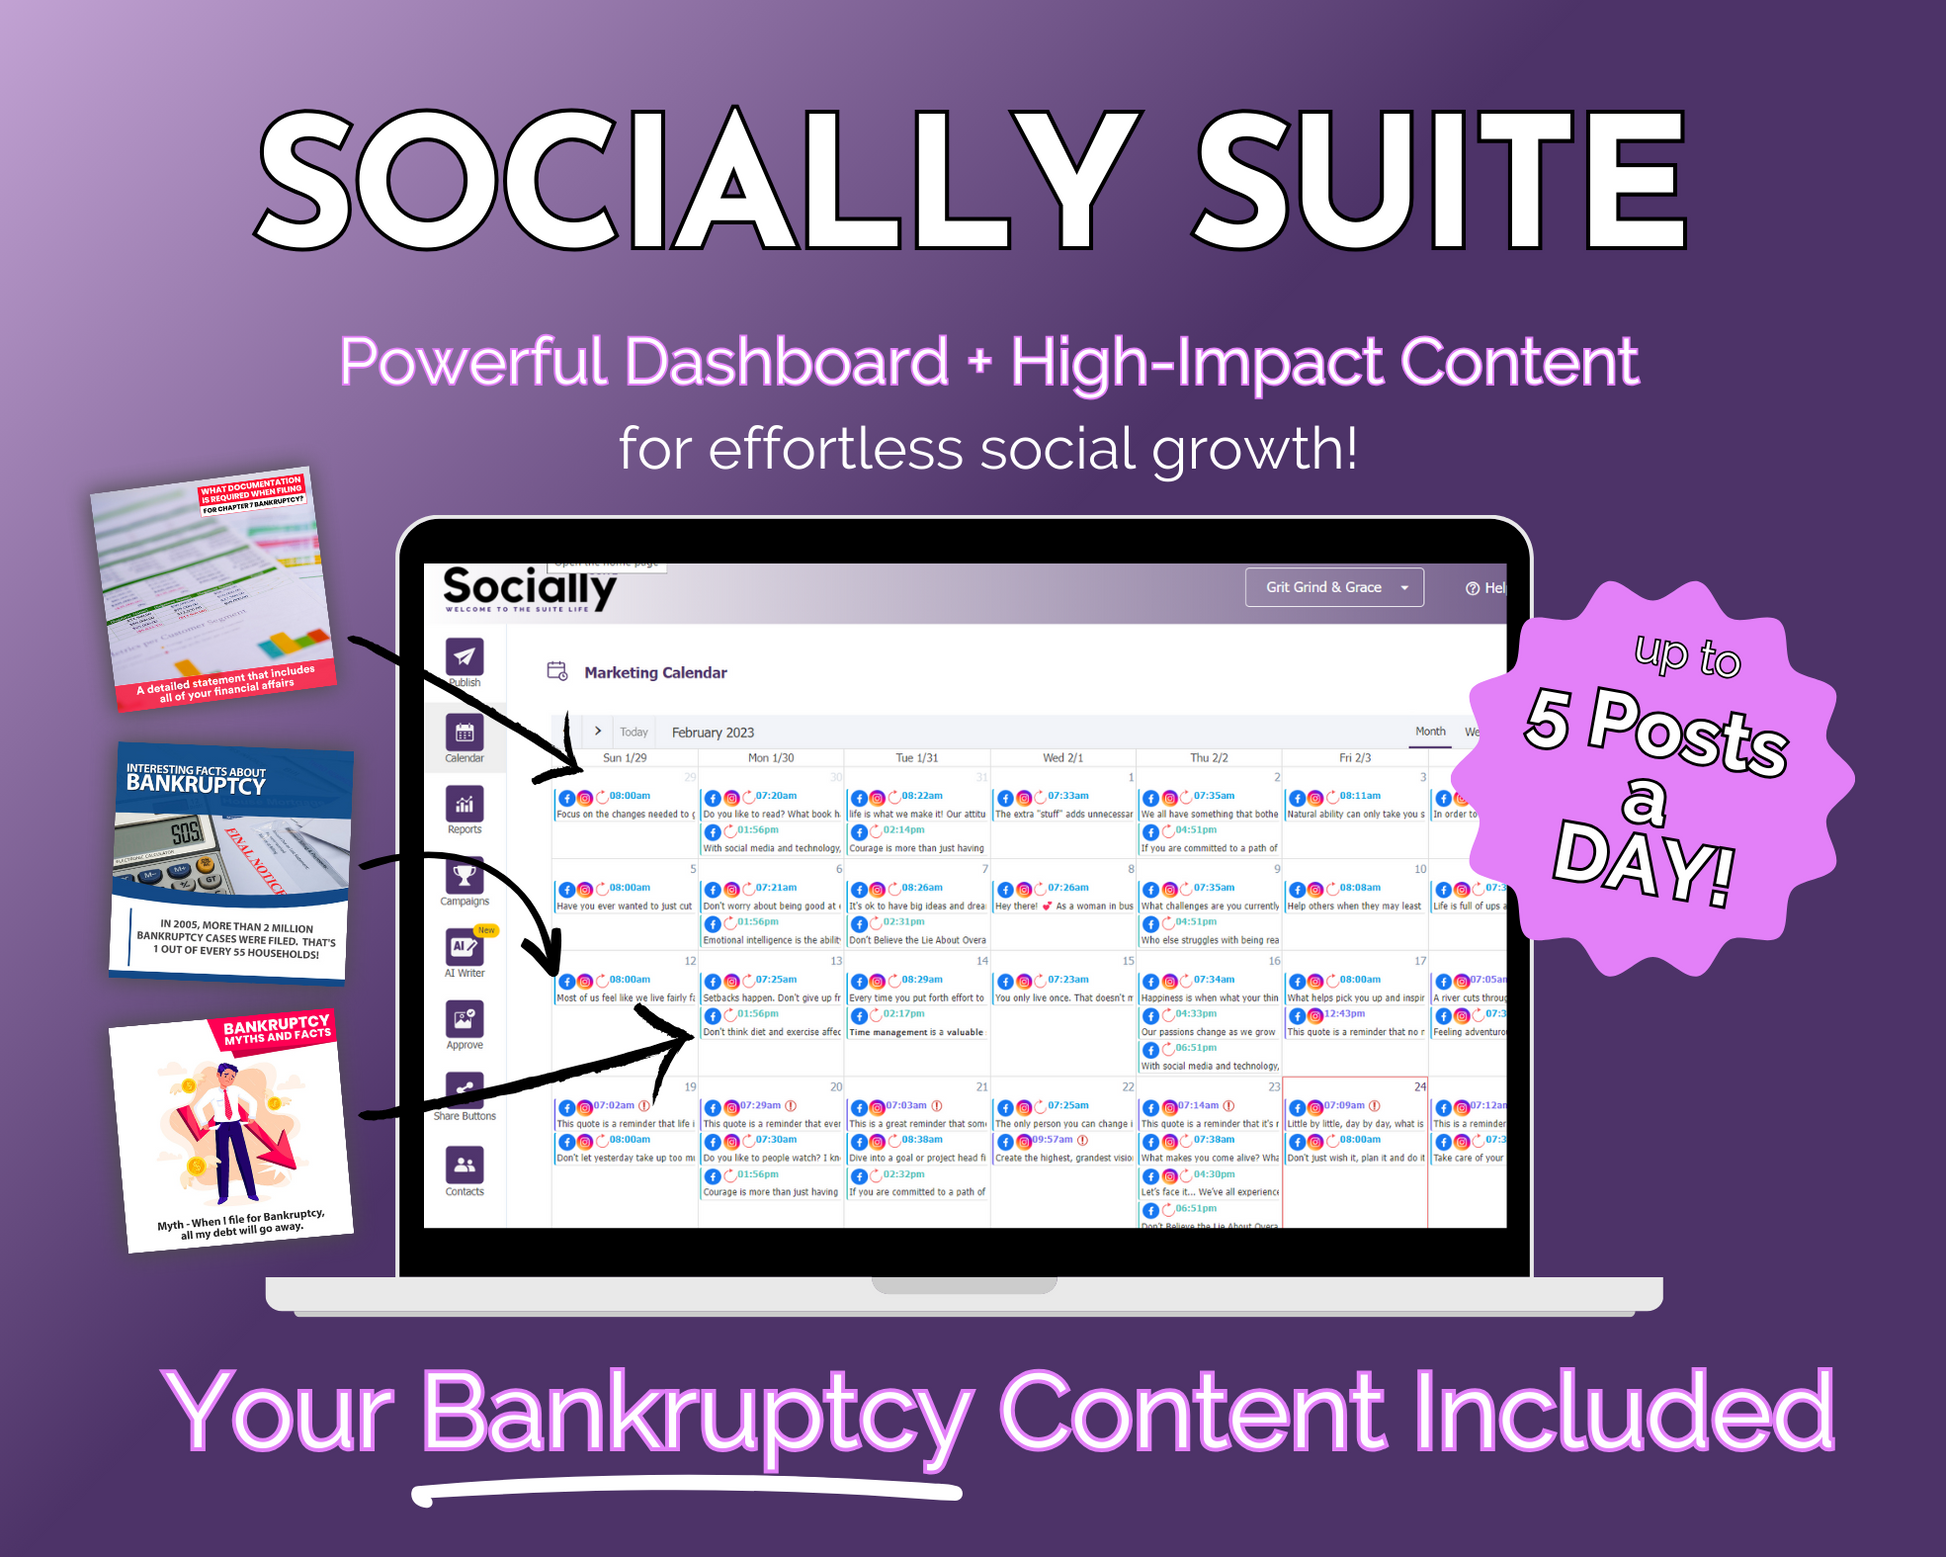 Get Socially Inclined's Socially Suite Membership is a powerful dashboard that offers high content included. It provides seamless content management and helps businesses enhance their online presence through effective social media marketing.